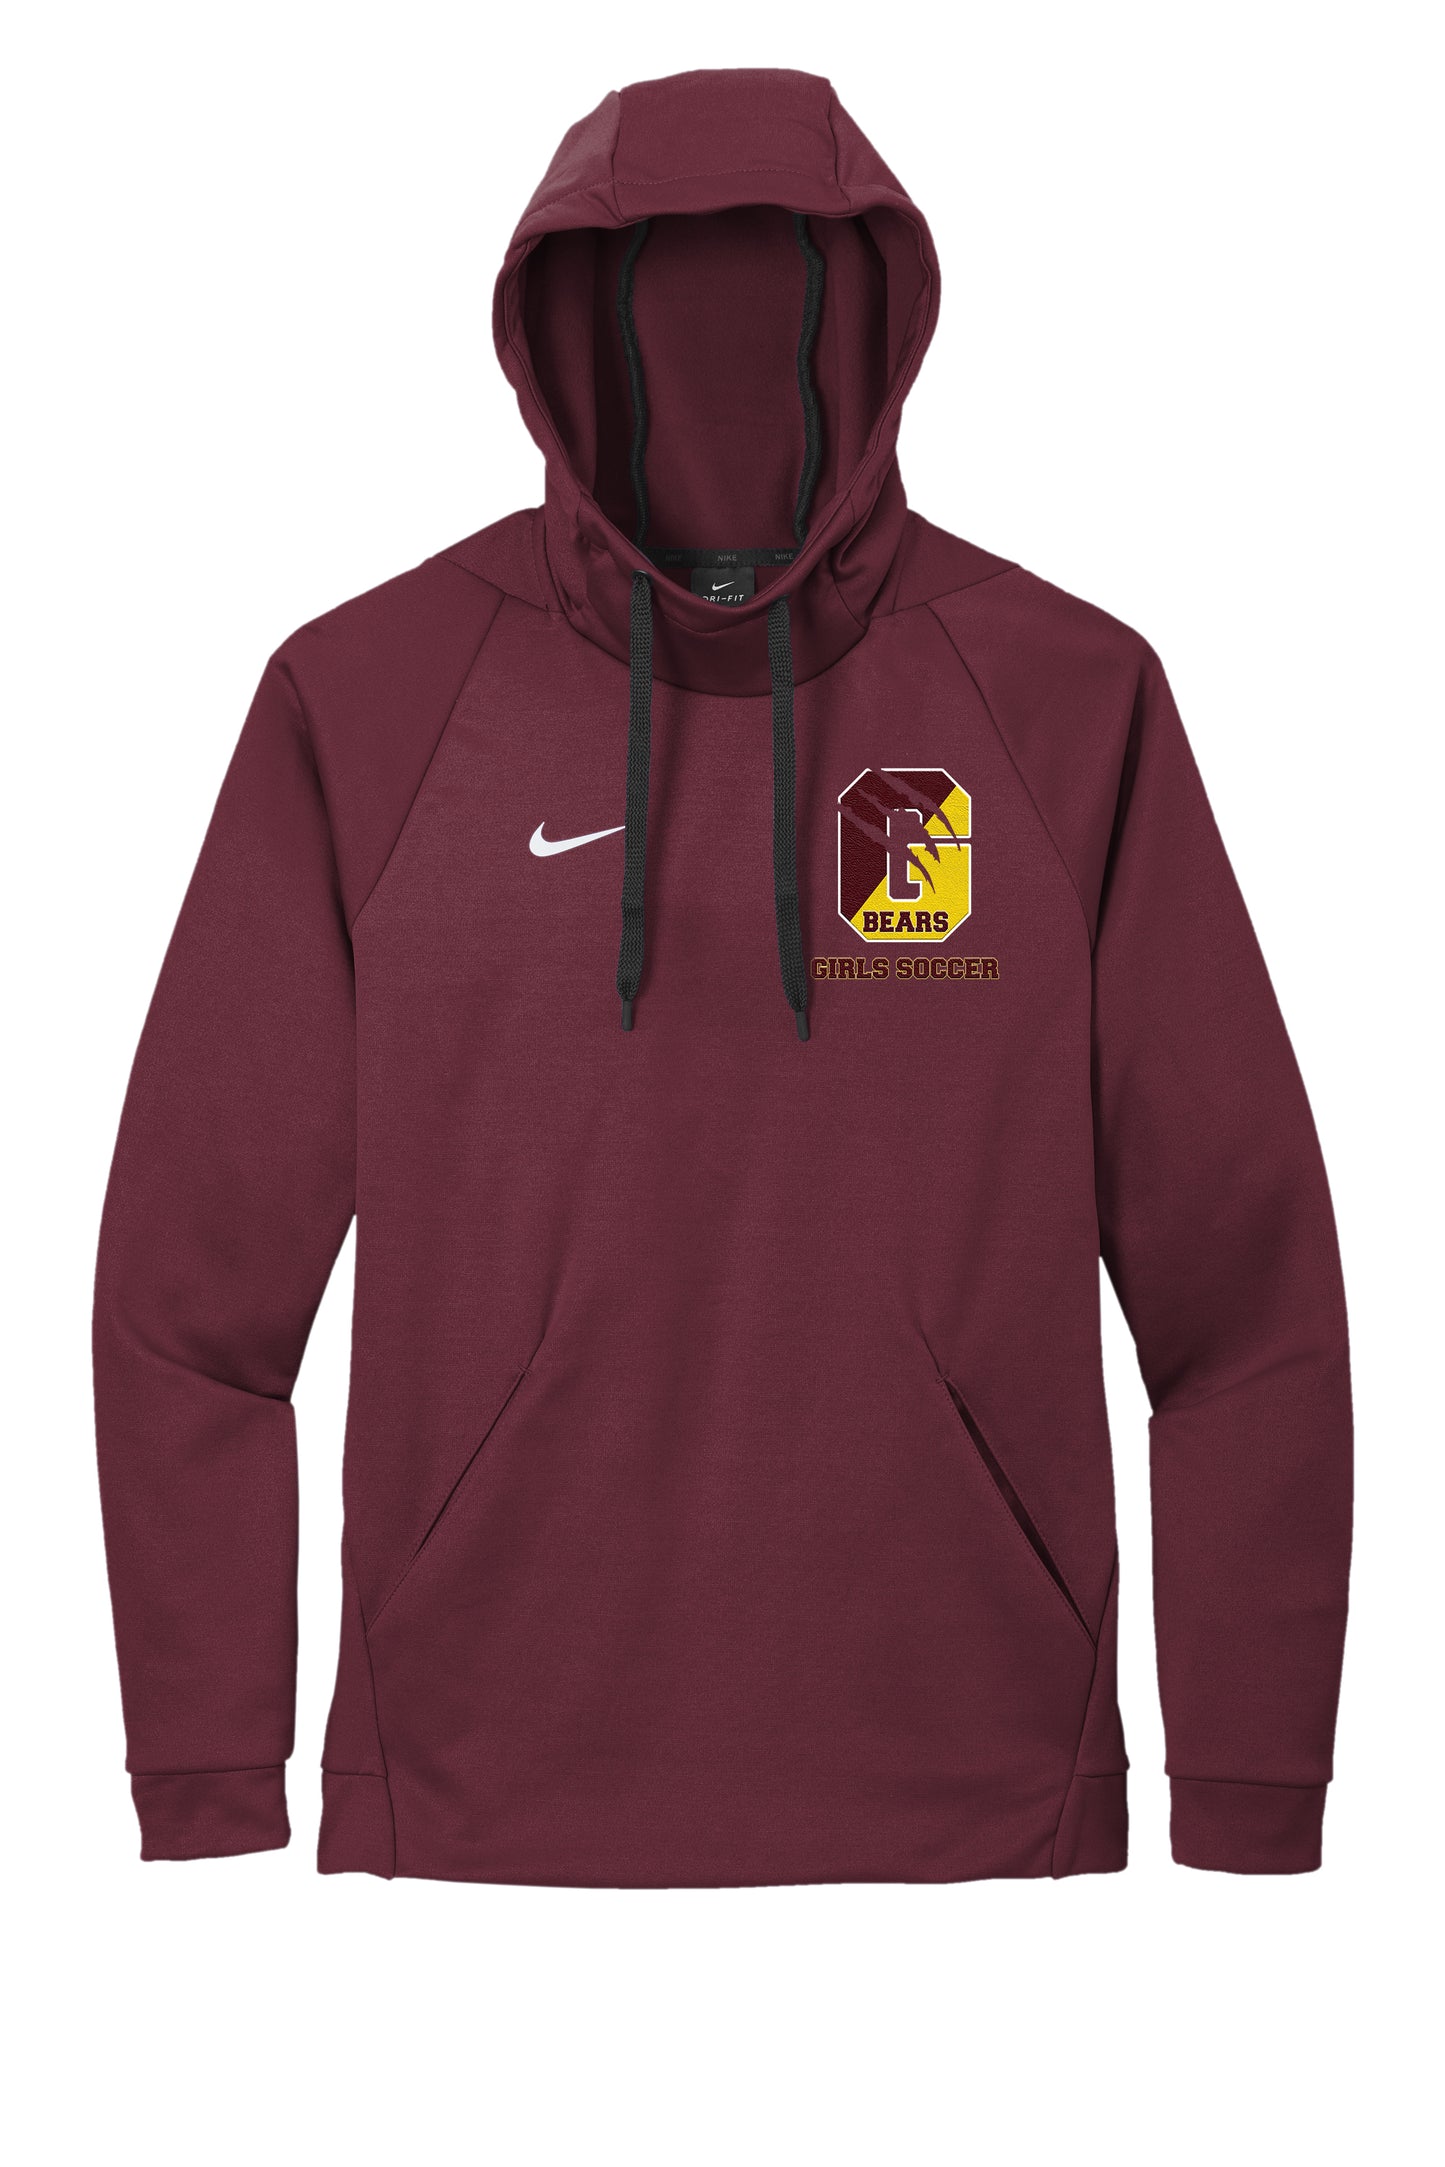 Granby Girls Soccer Nike Hoodie - CN9473 (color options available)